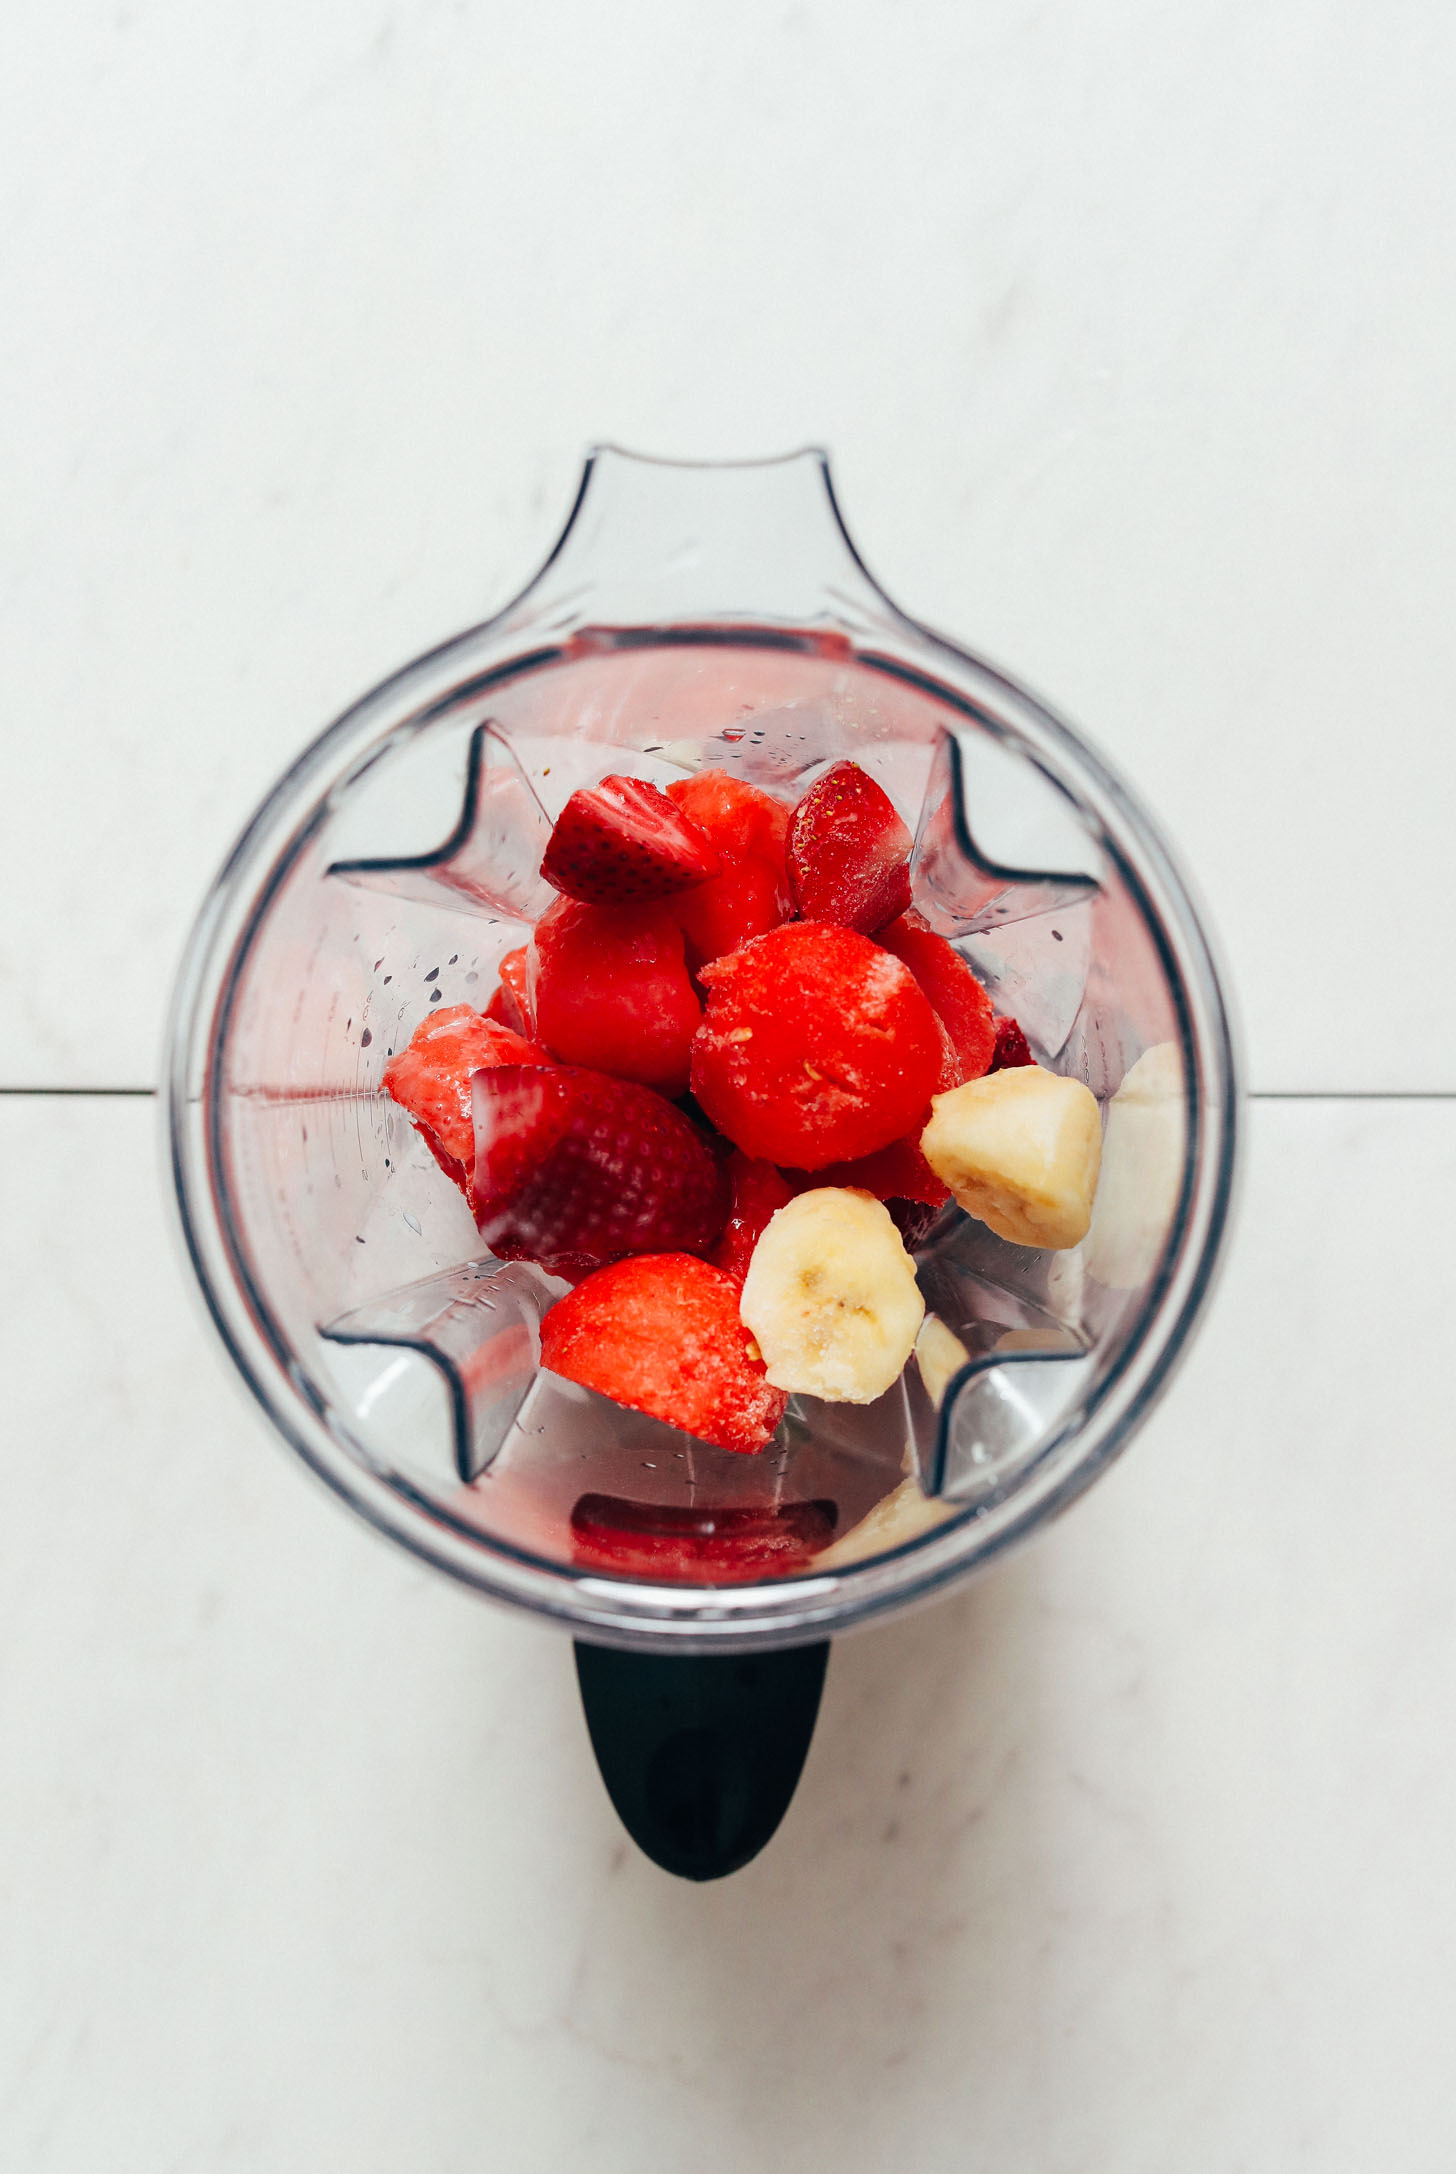 Banana, watermelon, and strawberries in a blender